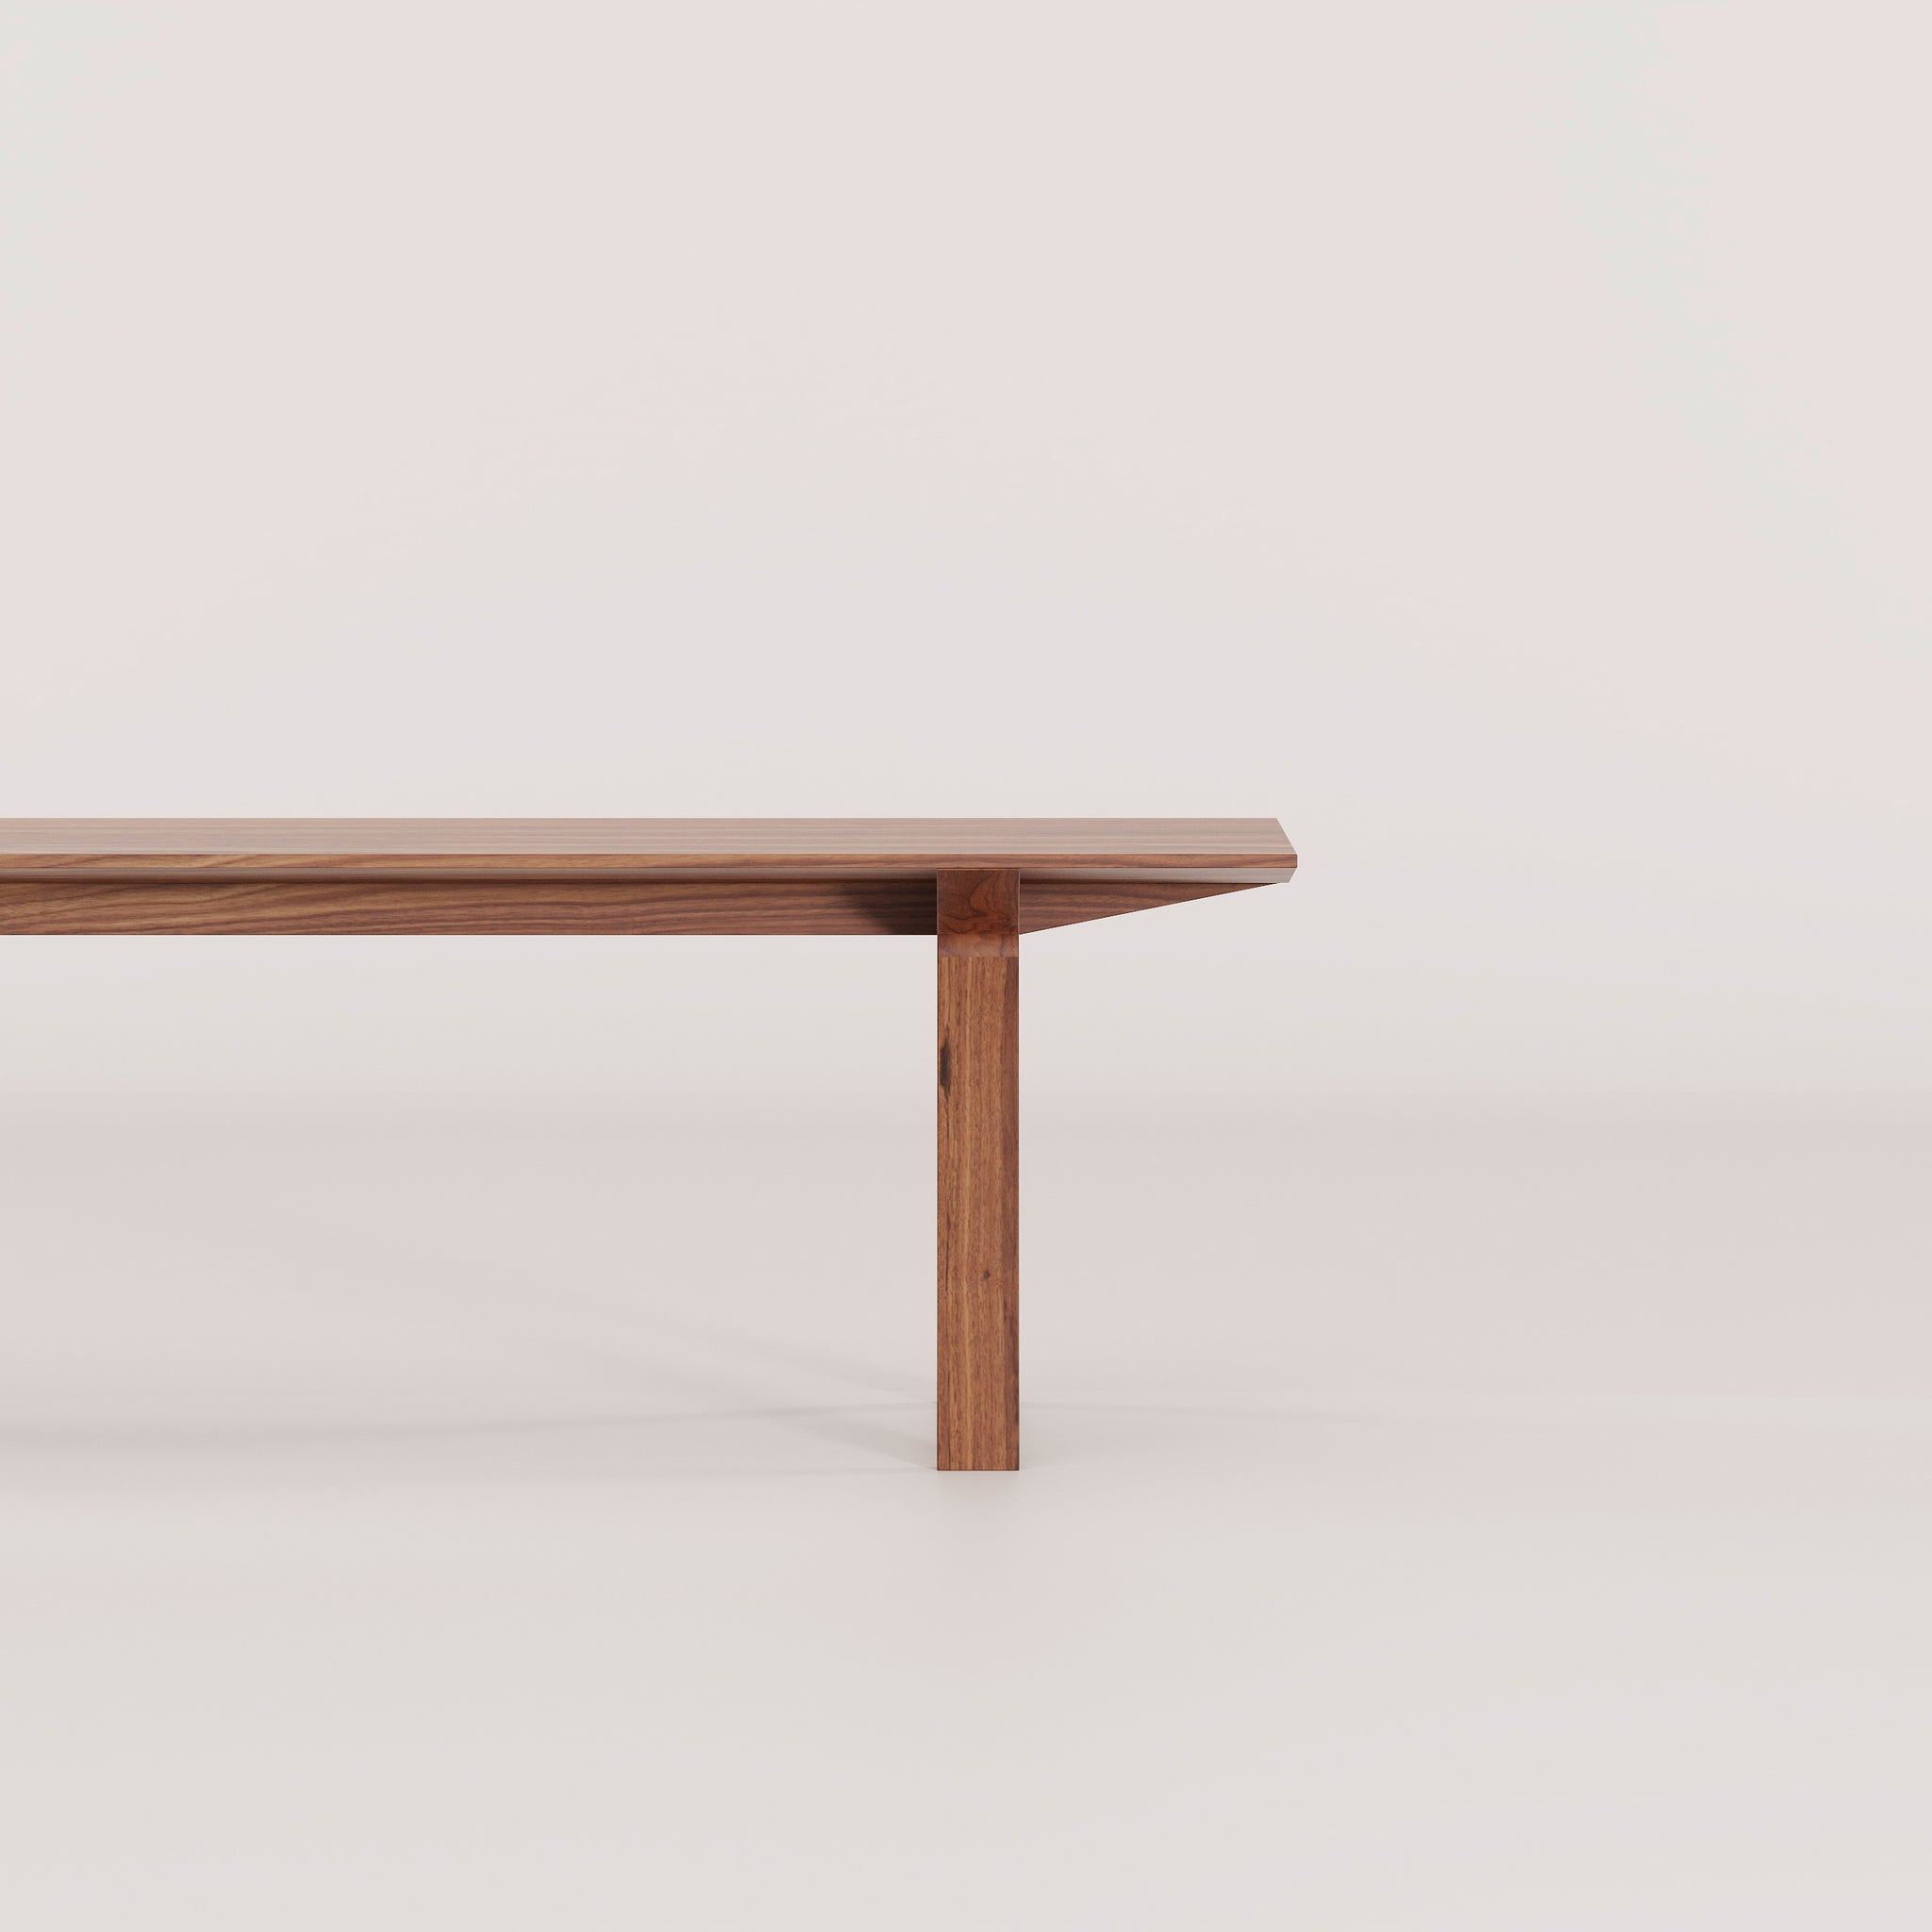 Louis bench in Walnut. Designed by Tom Fereday in Australia and handmade by Mast Furniture. 